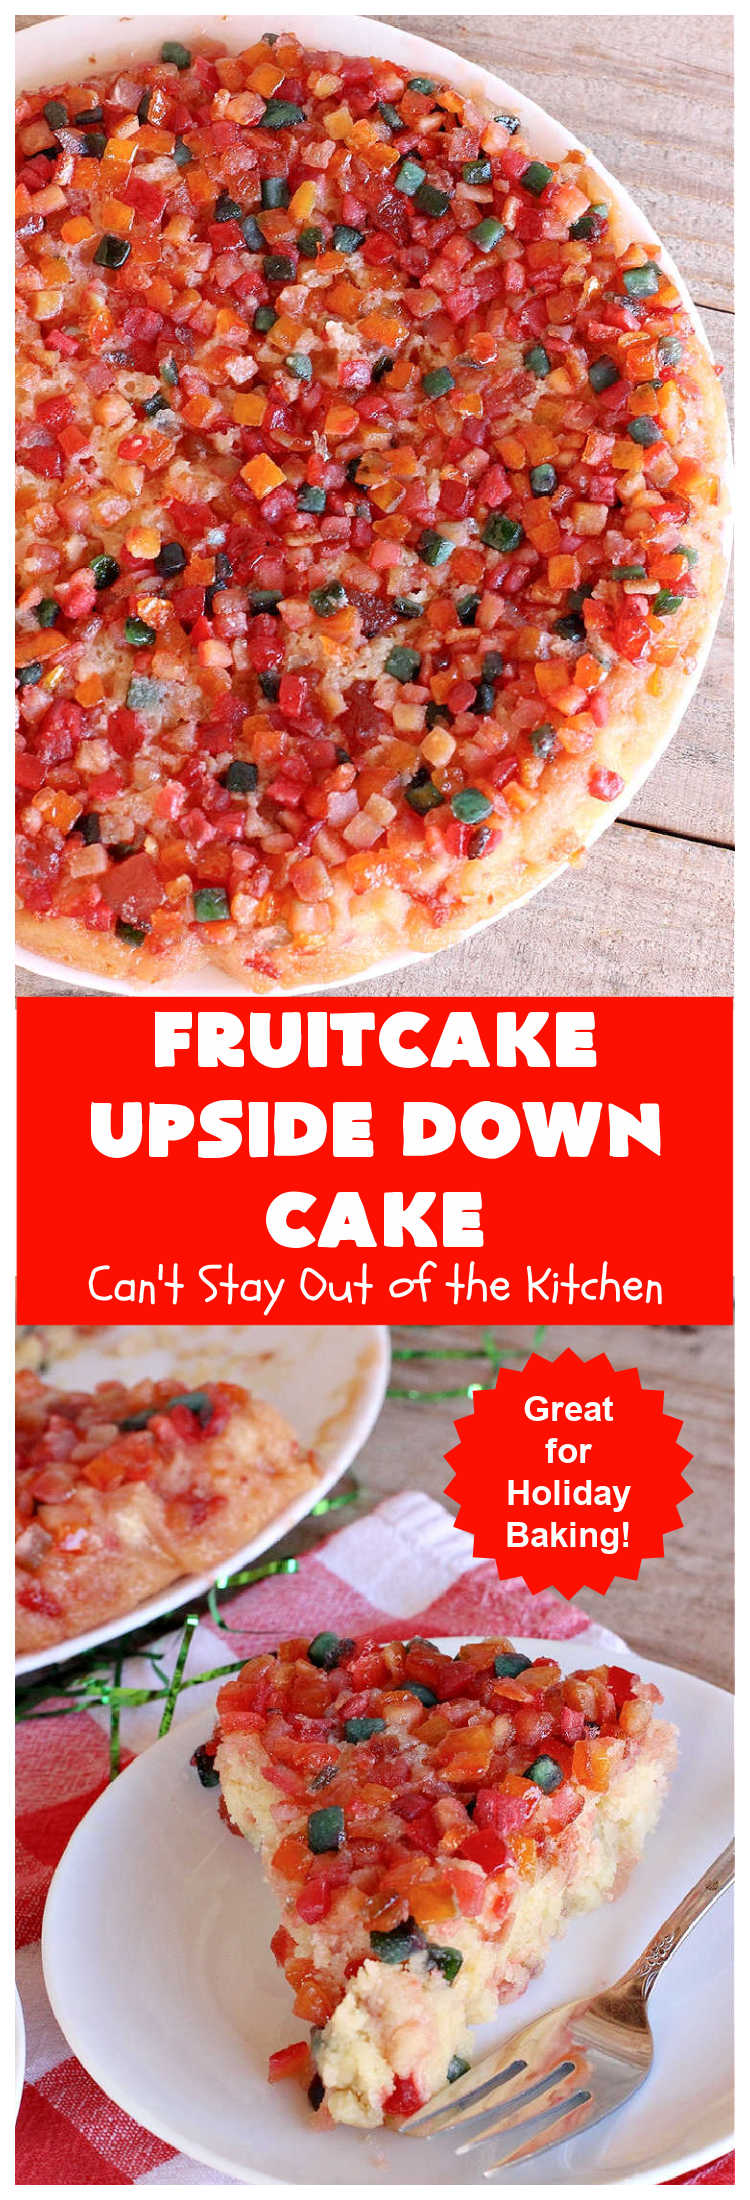 Fruitcake Upside Down Cake | Can't Stay Out of the Kitchen | this moist & delicious #cake is nothing like traditional #Fruitcake. This #UpsideDownCake is moist, drool-worthy & full of flavor. It will wow your #holiday company & friends. Beautiful, elegant & festive enough for any holiday party or gala. #HolidayDessert #FruitcakeDessert #FruitcakeUpsideDownCakeFruitcake Upside Down Cake | Can't Stay Out of the Kitchen | this moist & delicious #cake is nothing like traditional #Fruitcake. This #UpsideDownCake is moist, drool-worthy & full of flavor. It will wow your #holiday company & friends. Beautiful, elegant & festive enough for any holiday party or gala. #HolidayDessert #FruitcakeDessert #FruitcakeUpsideDownCake